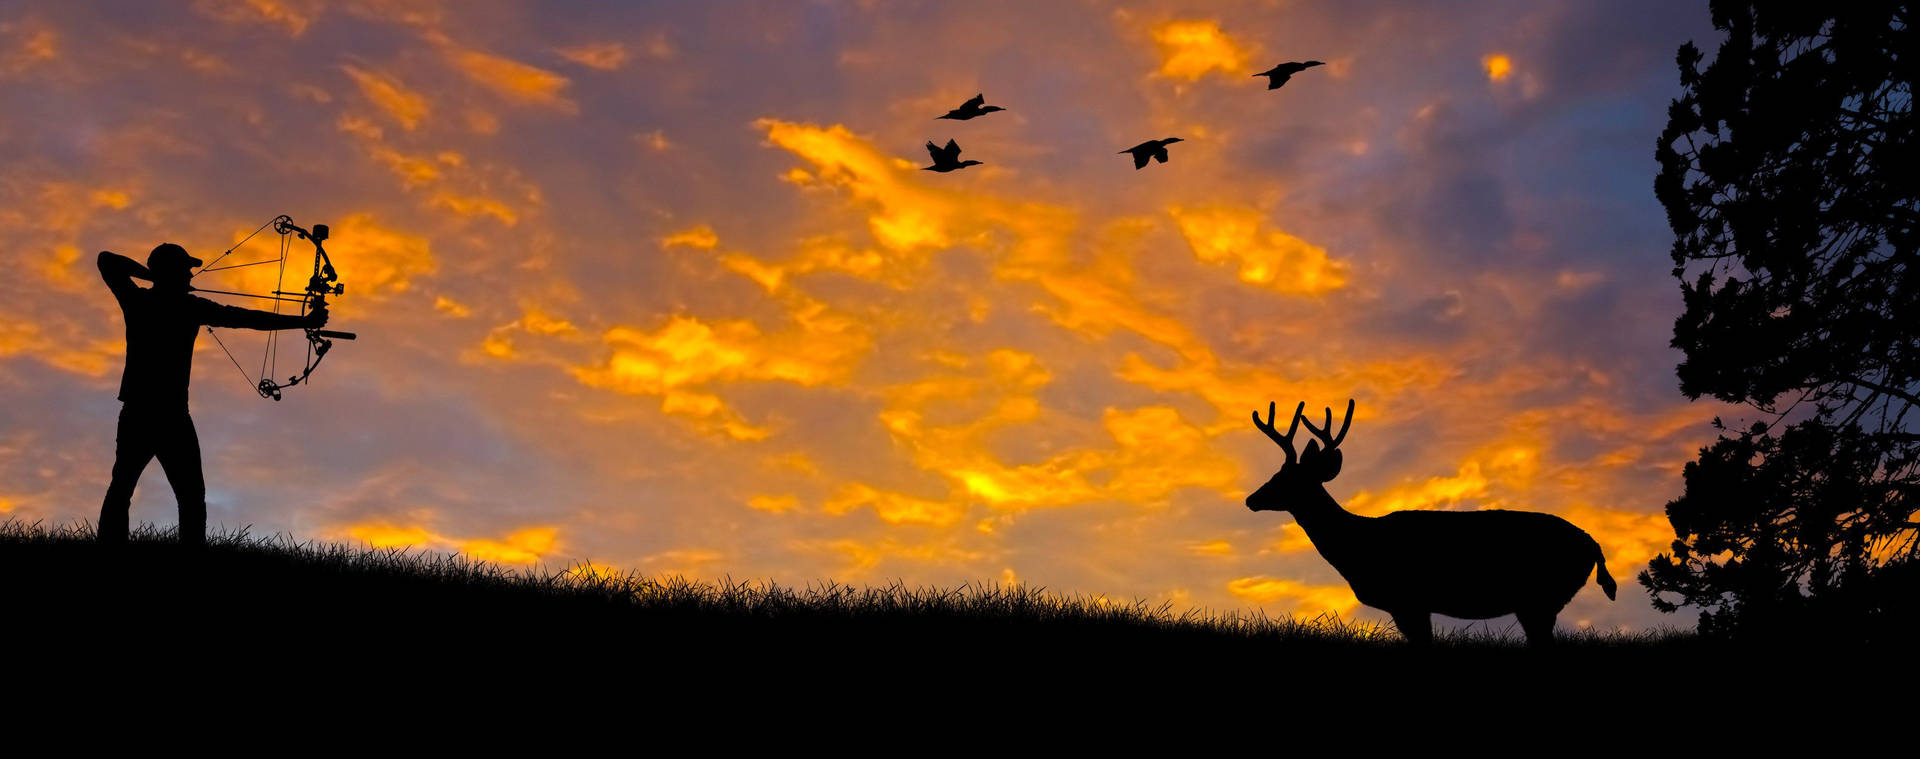 Tracking Down the Trophy Elk at Sunset Wallpaper